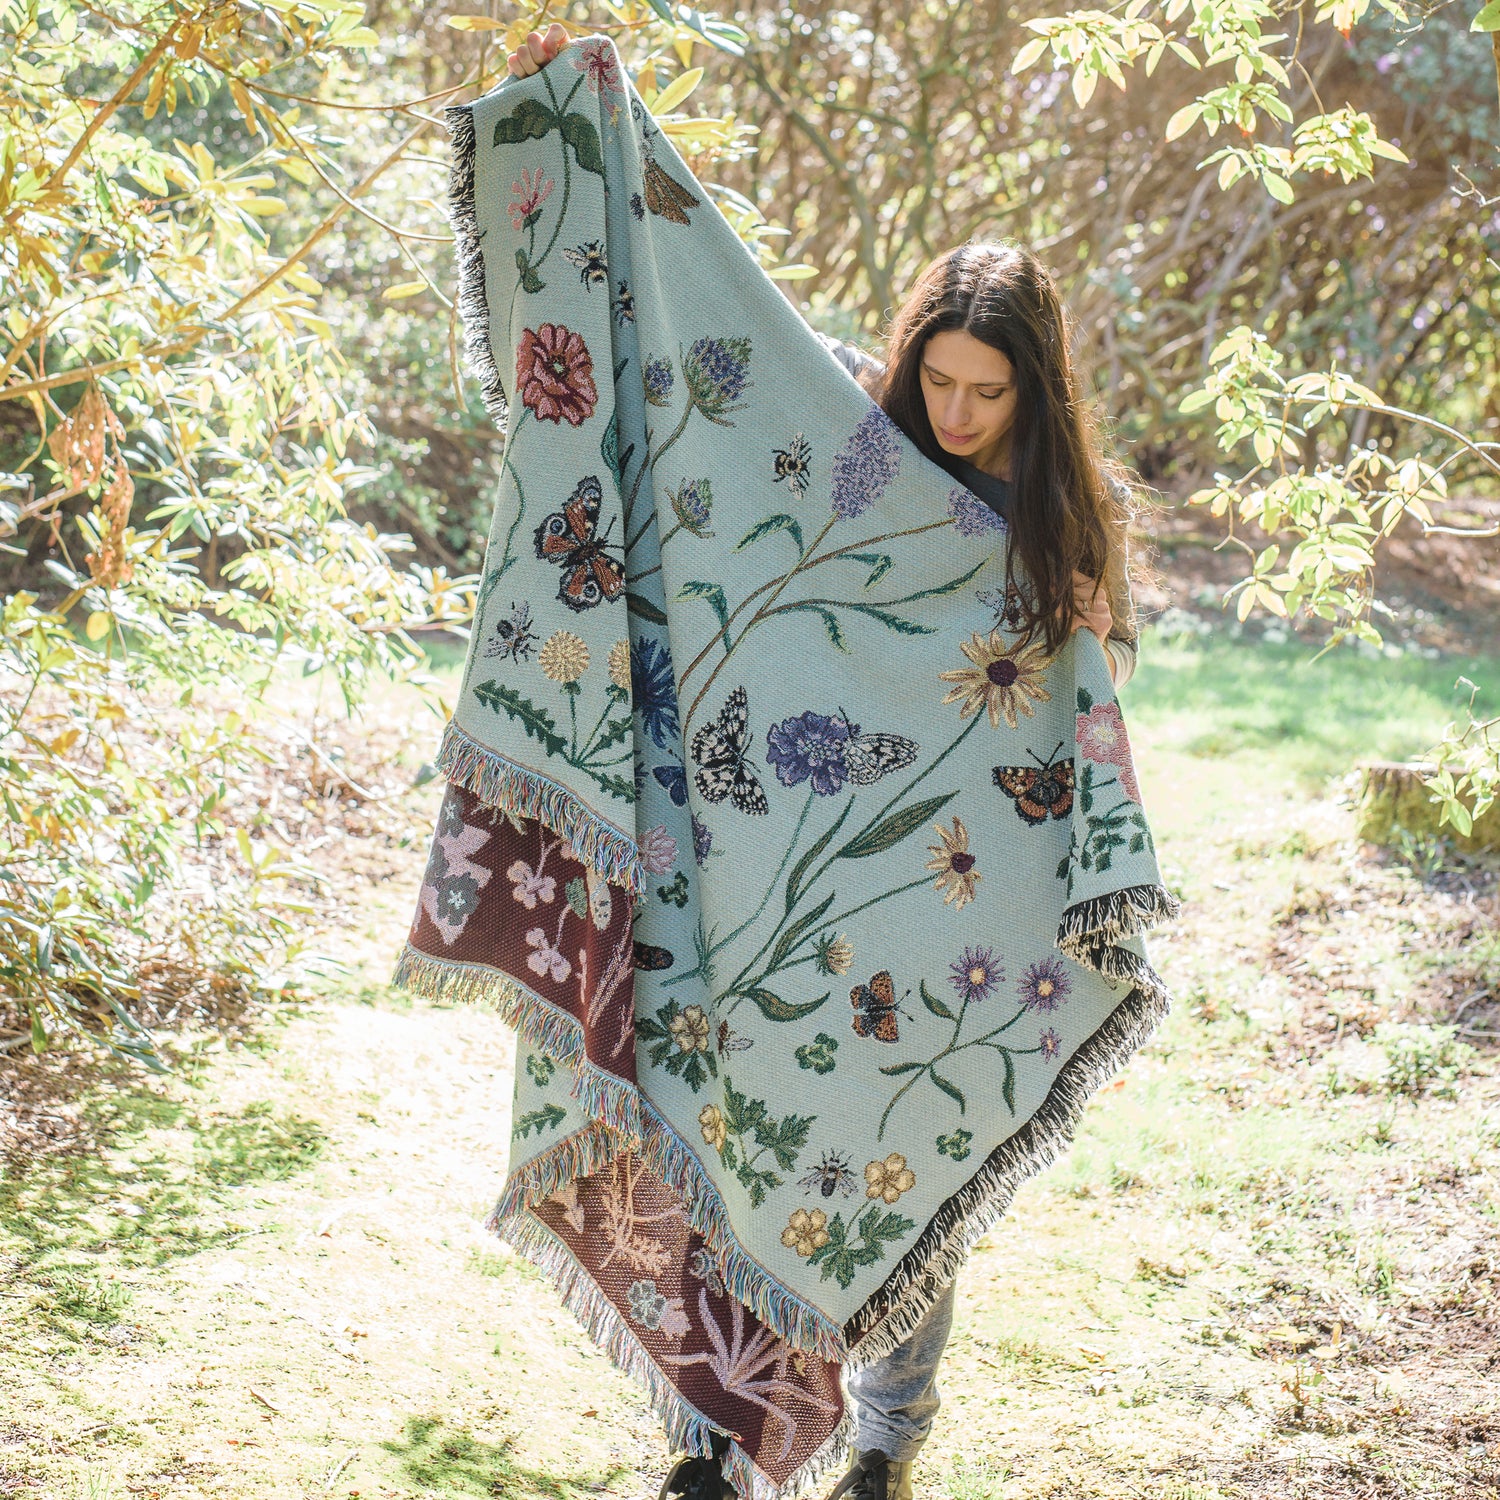 pale green woven blanket held up by woman in dappled sunlight with wildflower and butterfly pattern